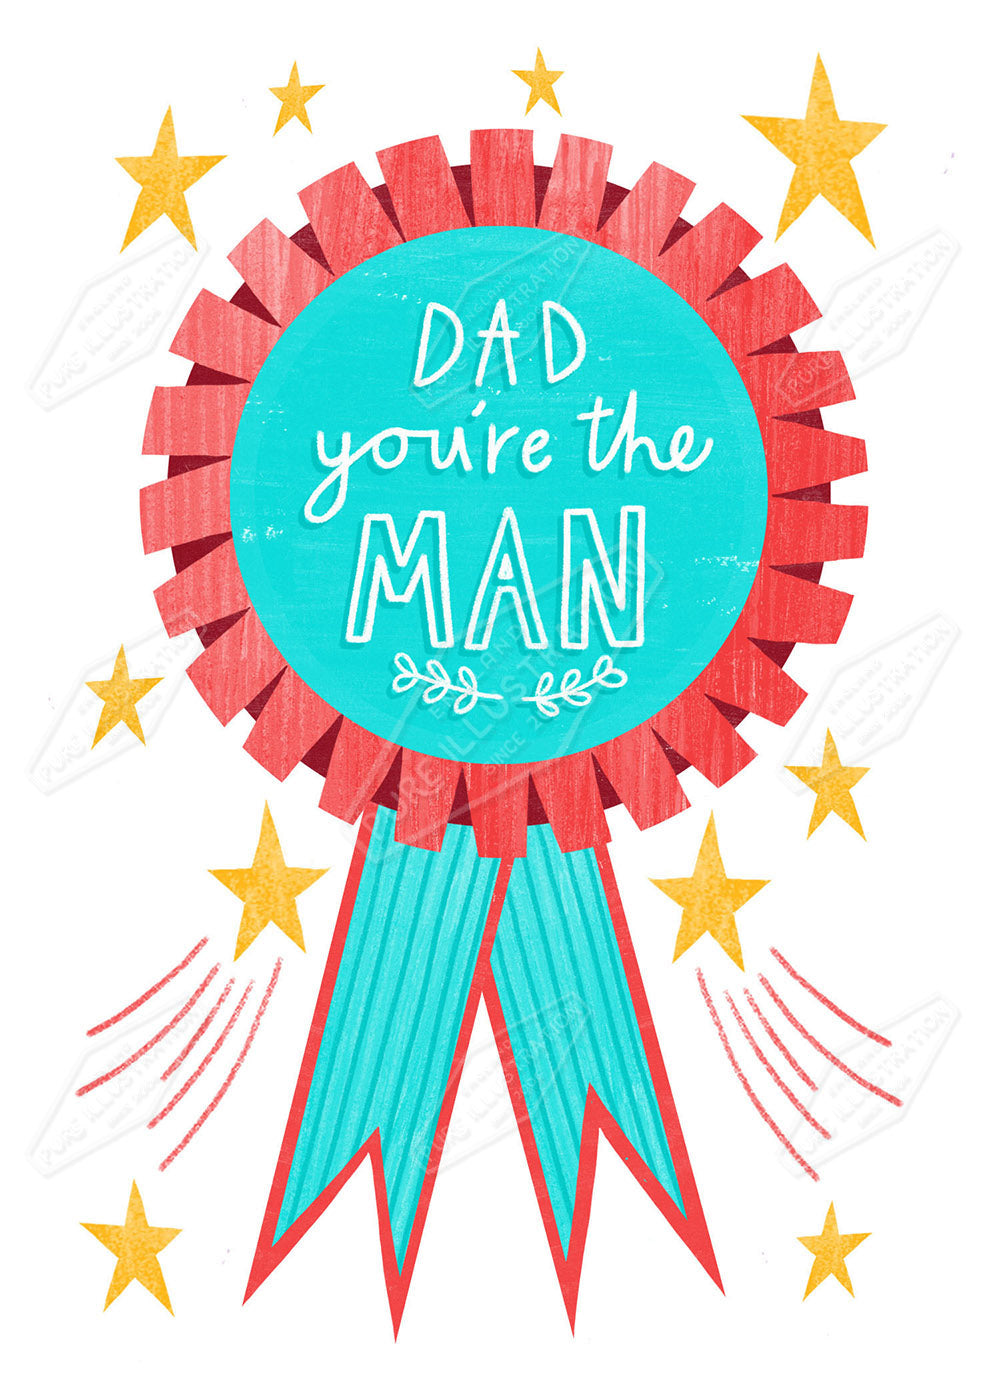 Dad Birthday / Father's Day Medal Greeting Card Design - by Leah Brideaux - Pure Art Licensing Agency & Surface Design Studio